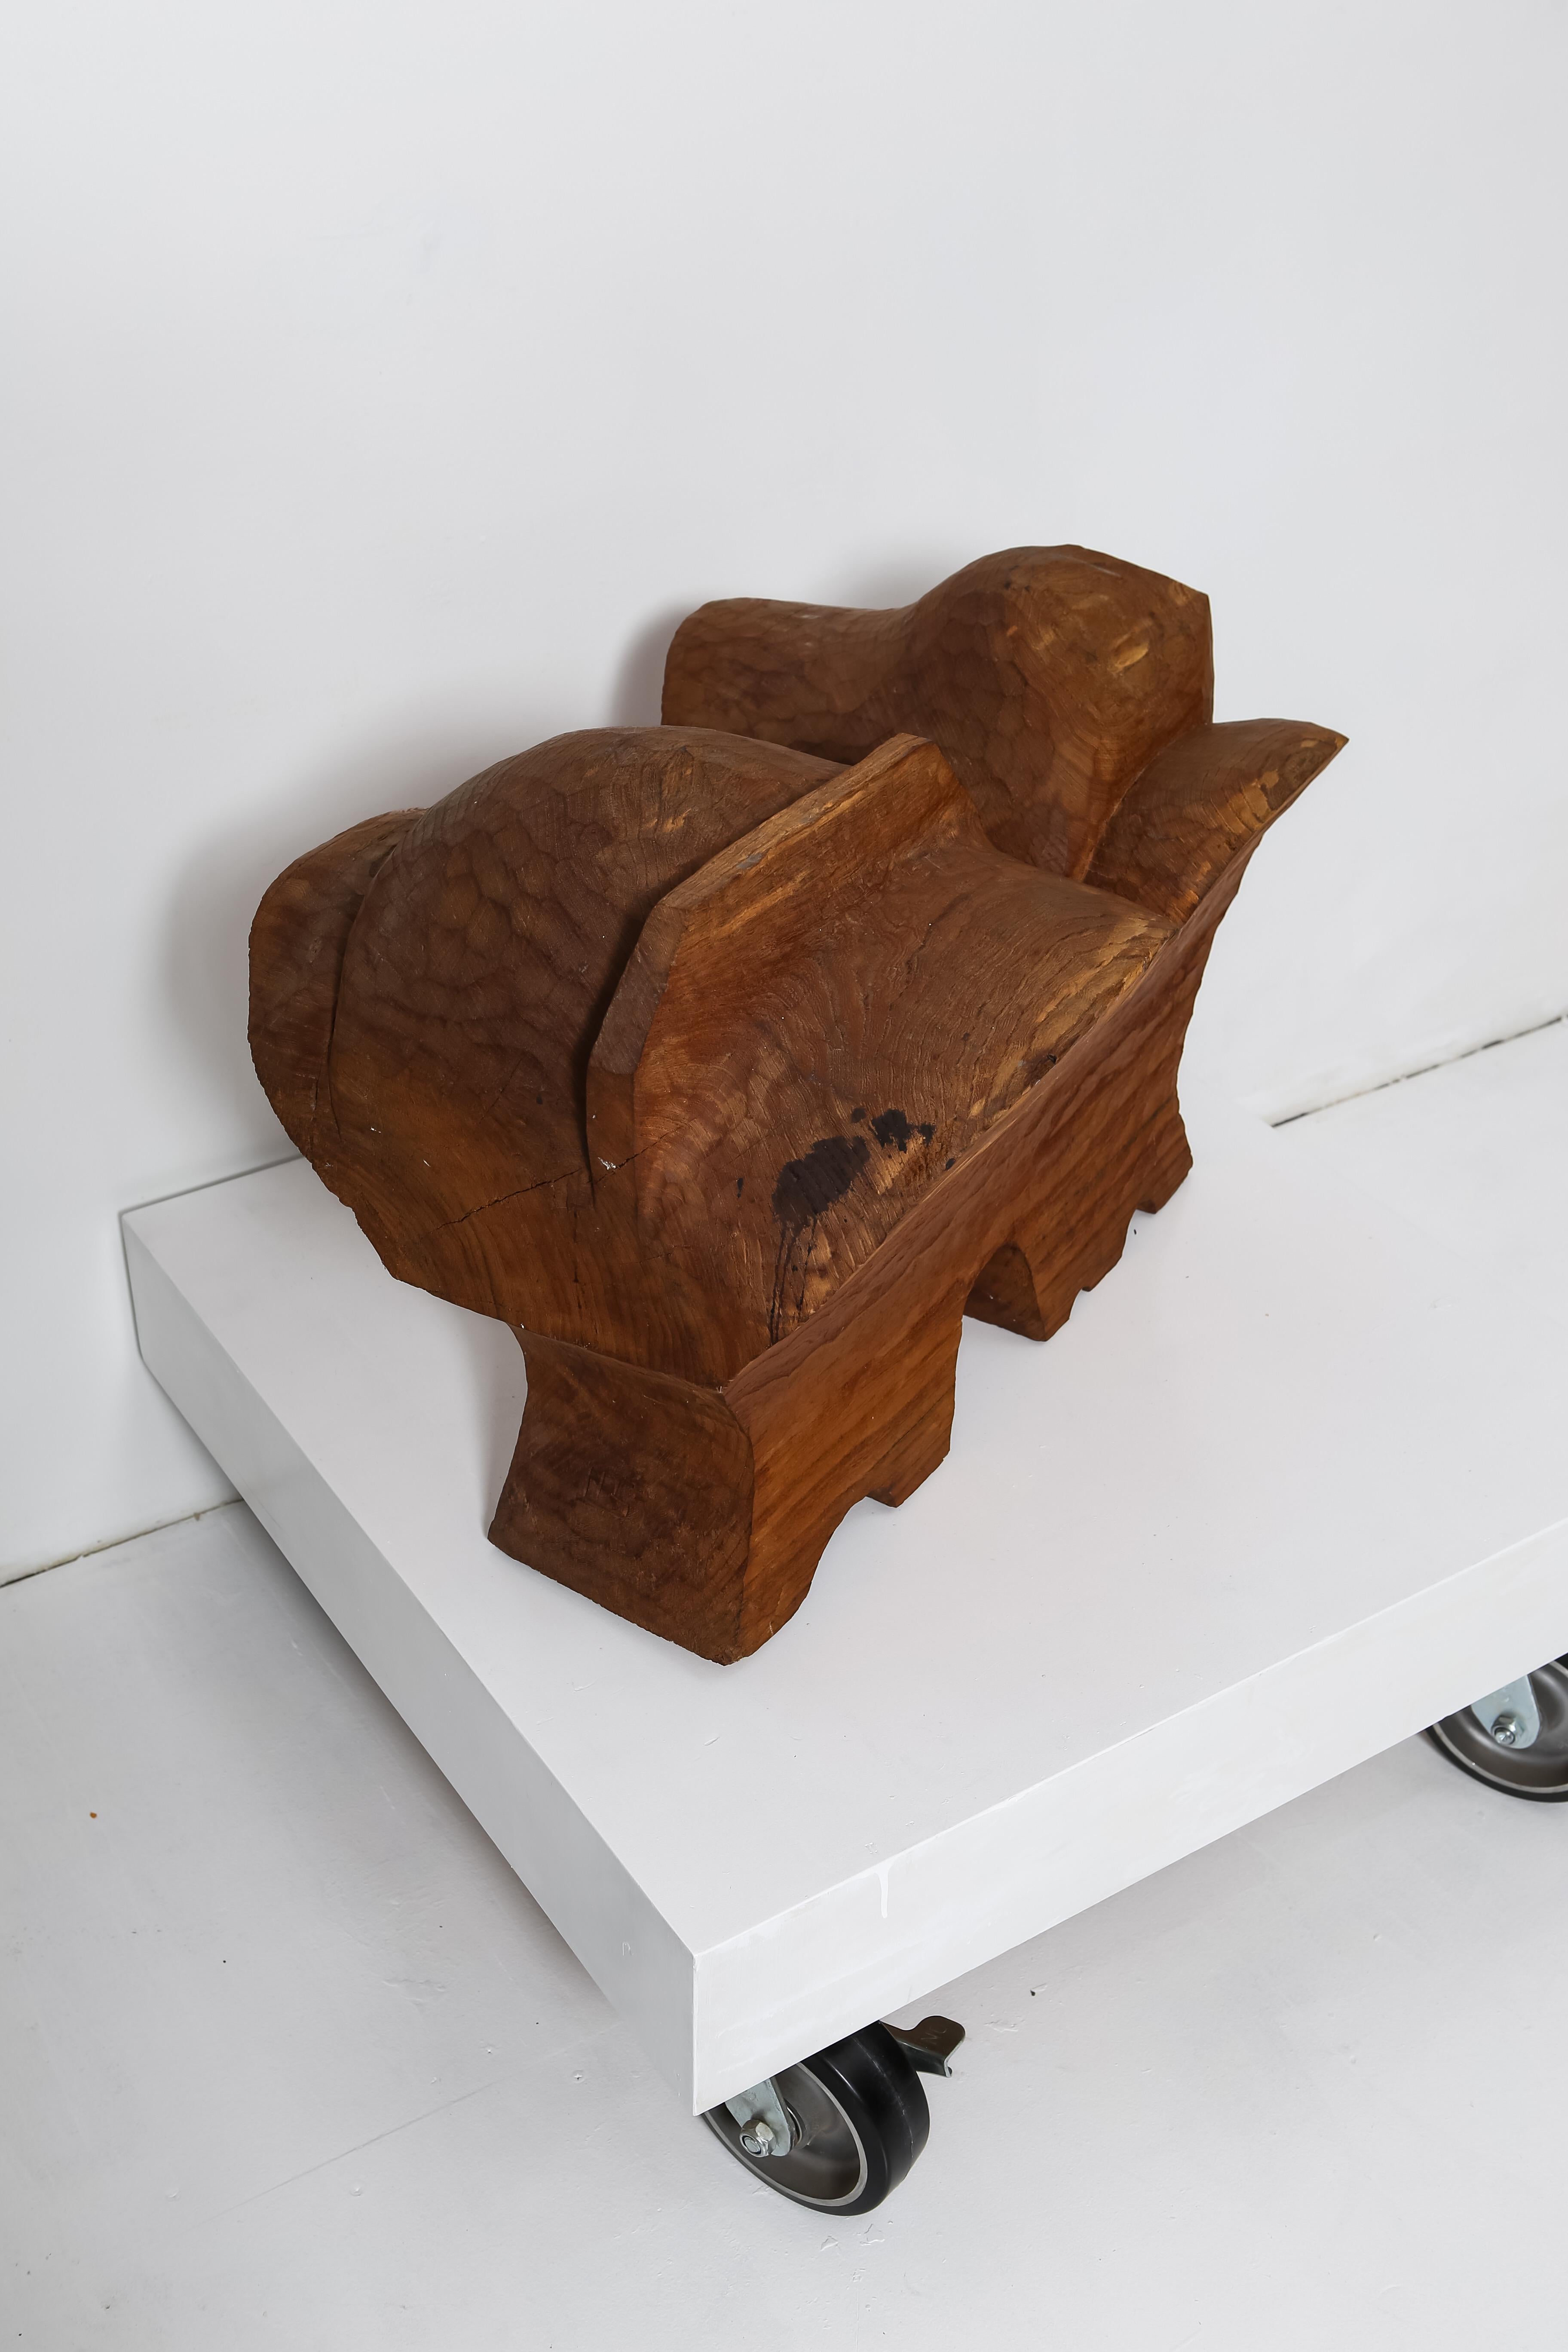 Hand-Carved Abstract wood sculpture by Leroy Setziol For Sale